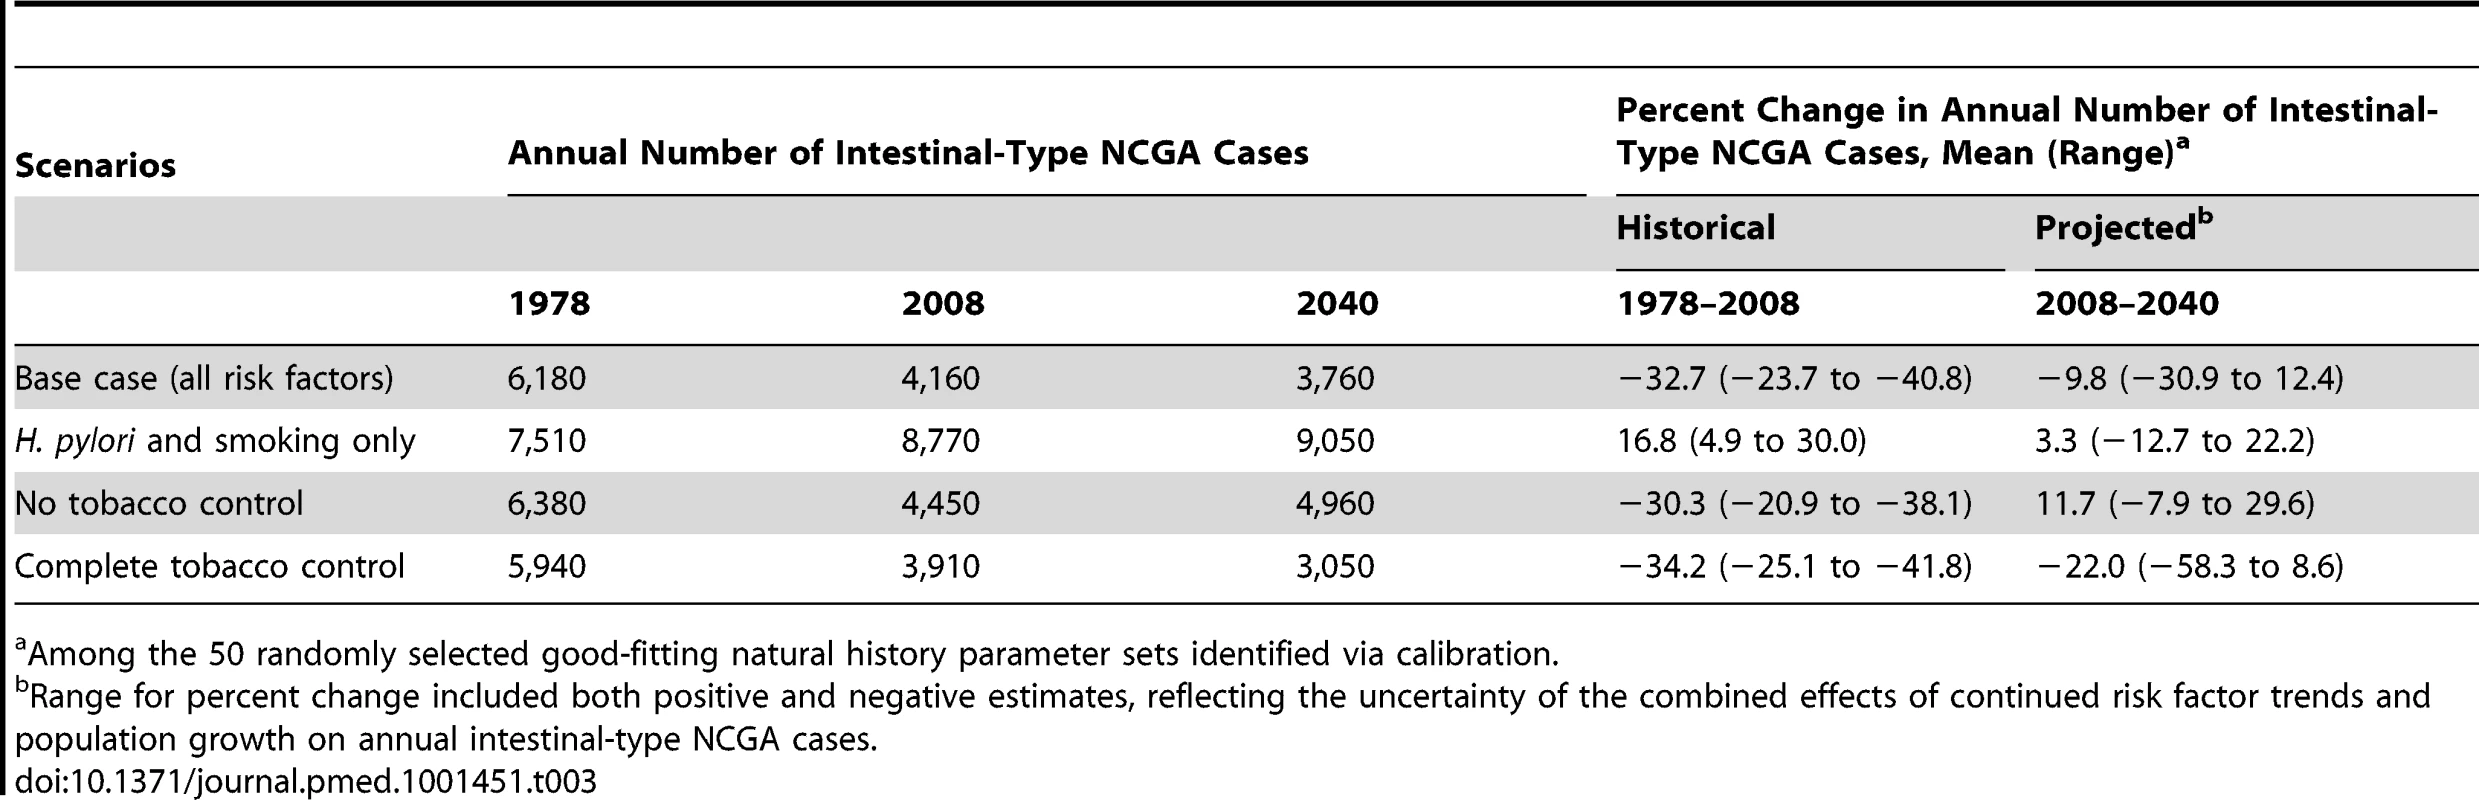 Modeled intestinal-type NCGA outcomes between 1978 and 2040: annual number of cancer cases and percent change in number of cases.